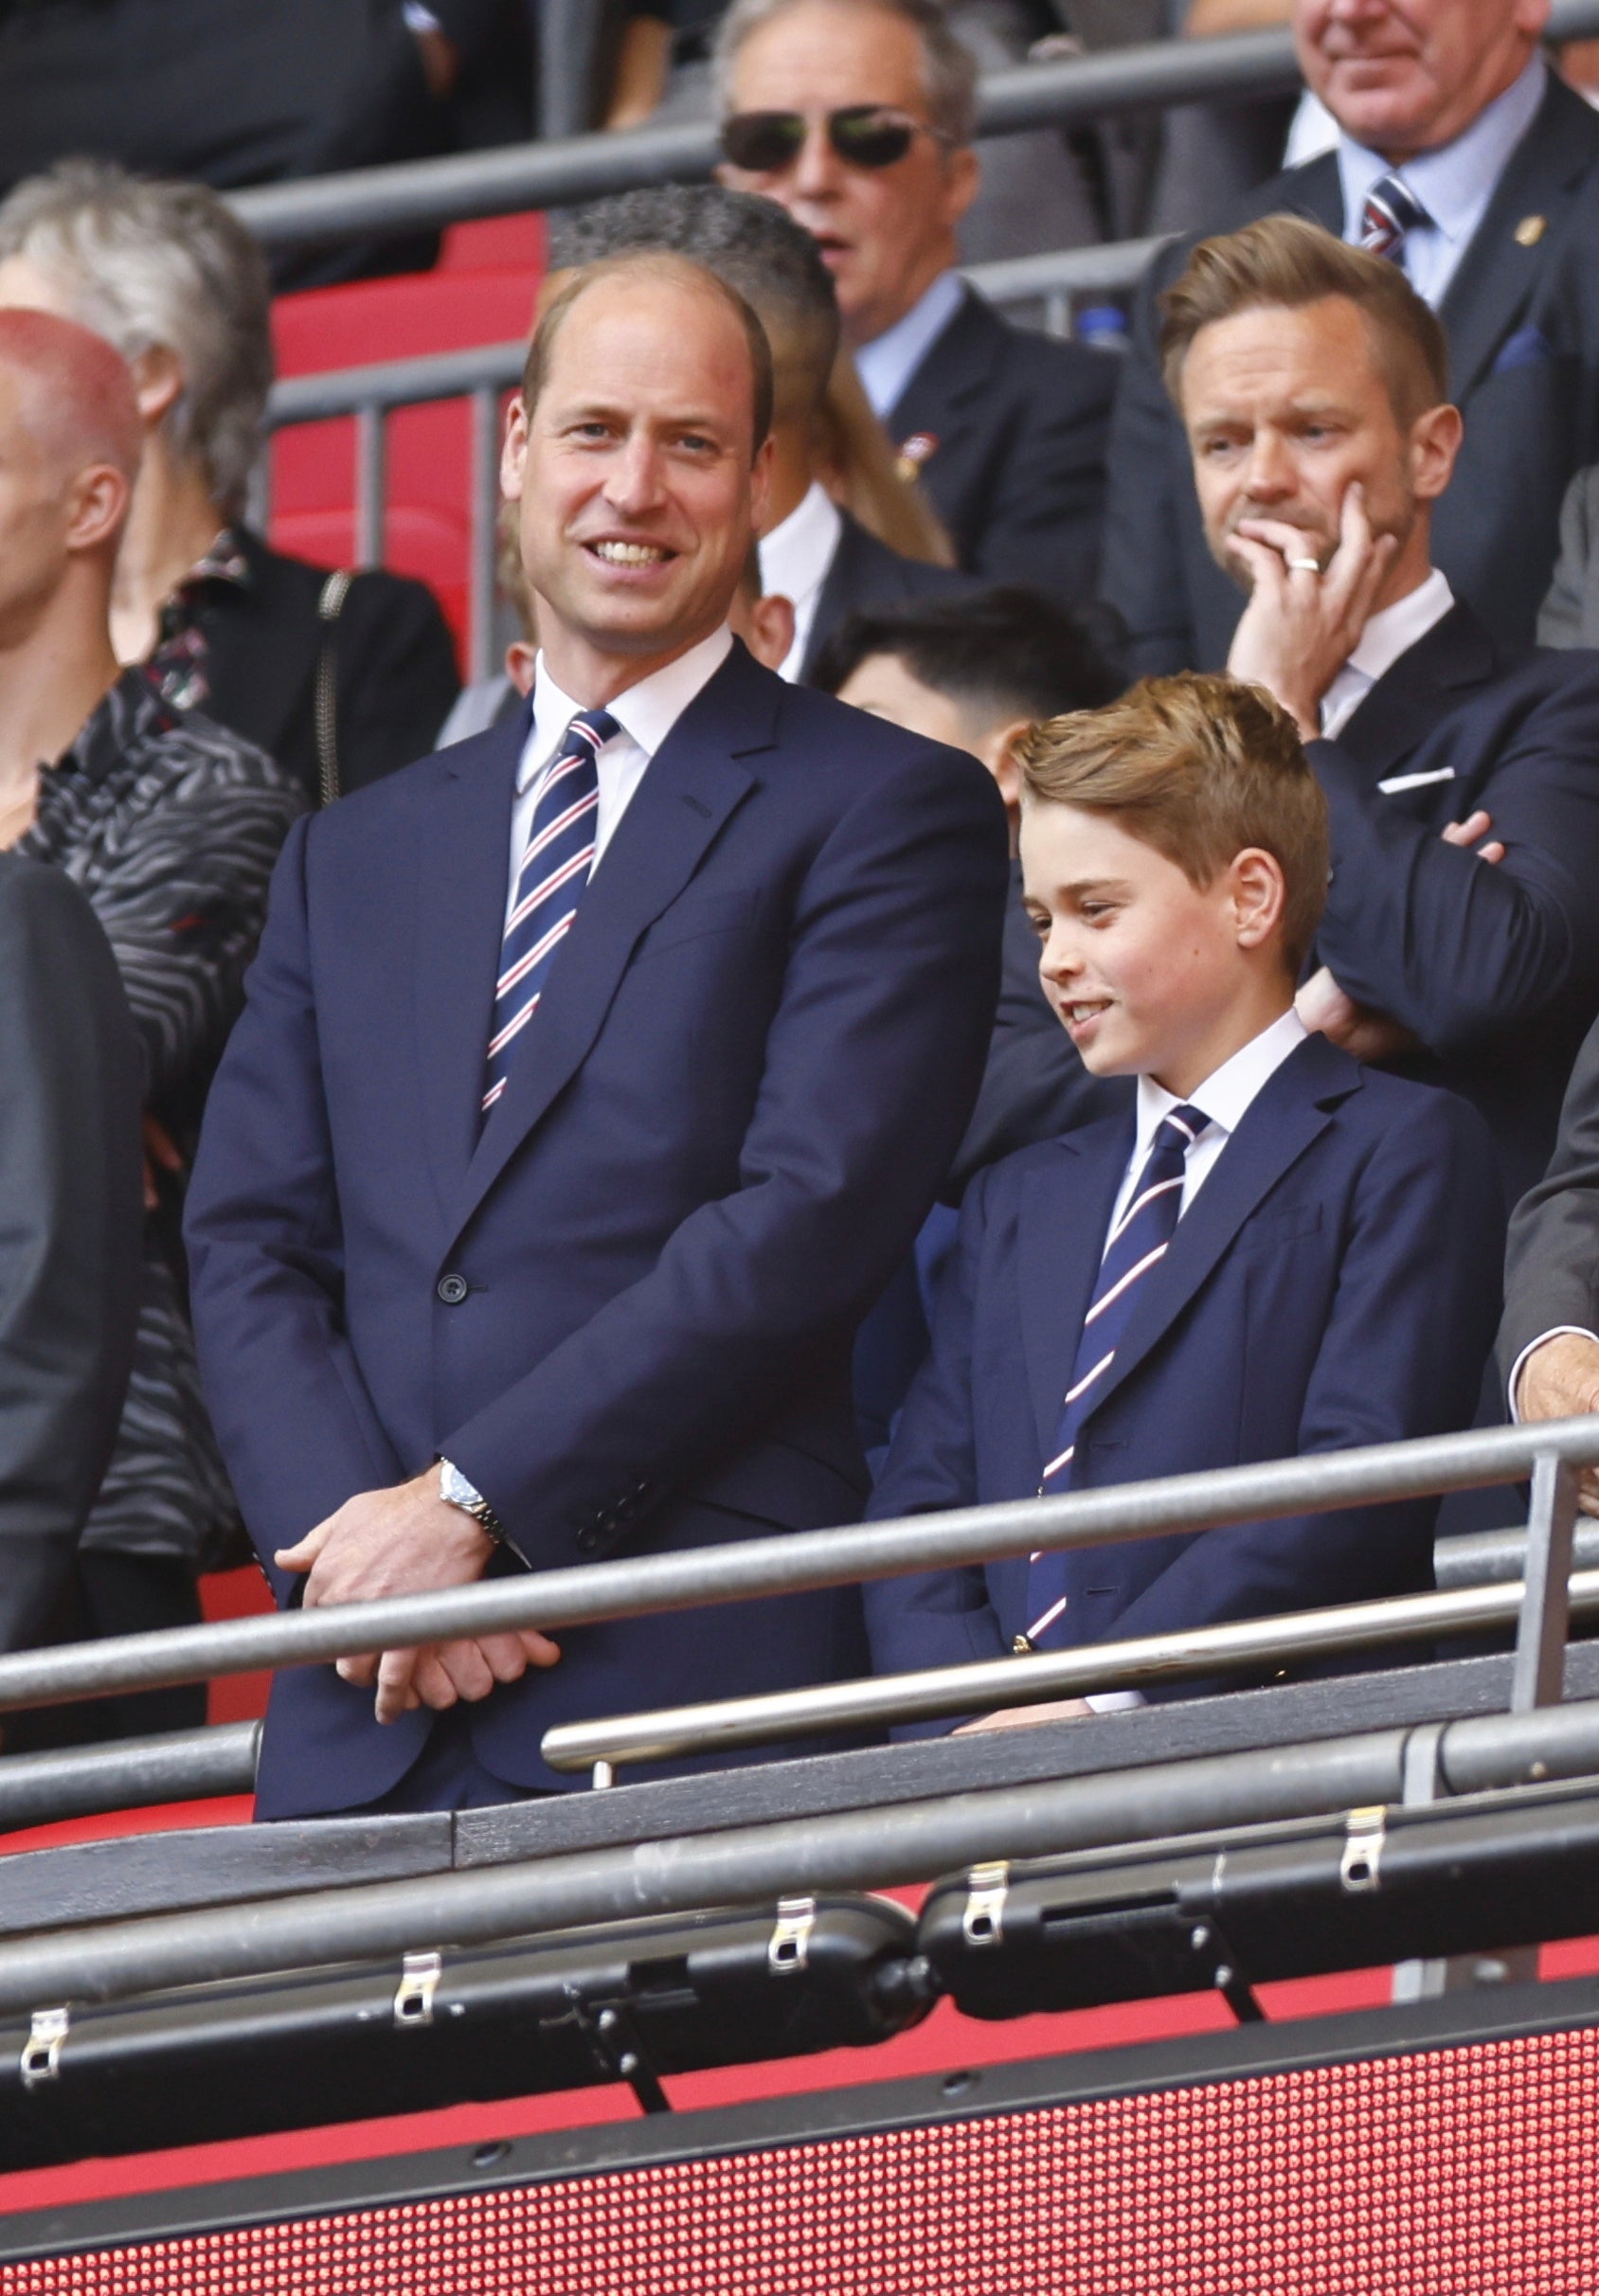 Prince William and Prince George will reportedly play key roles in the upcoming ceremony